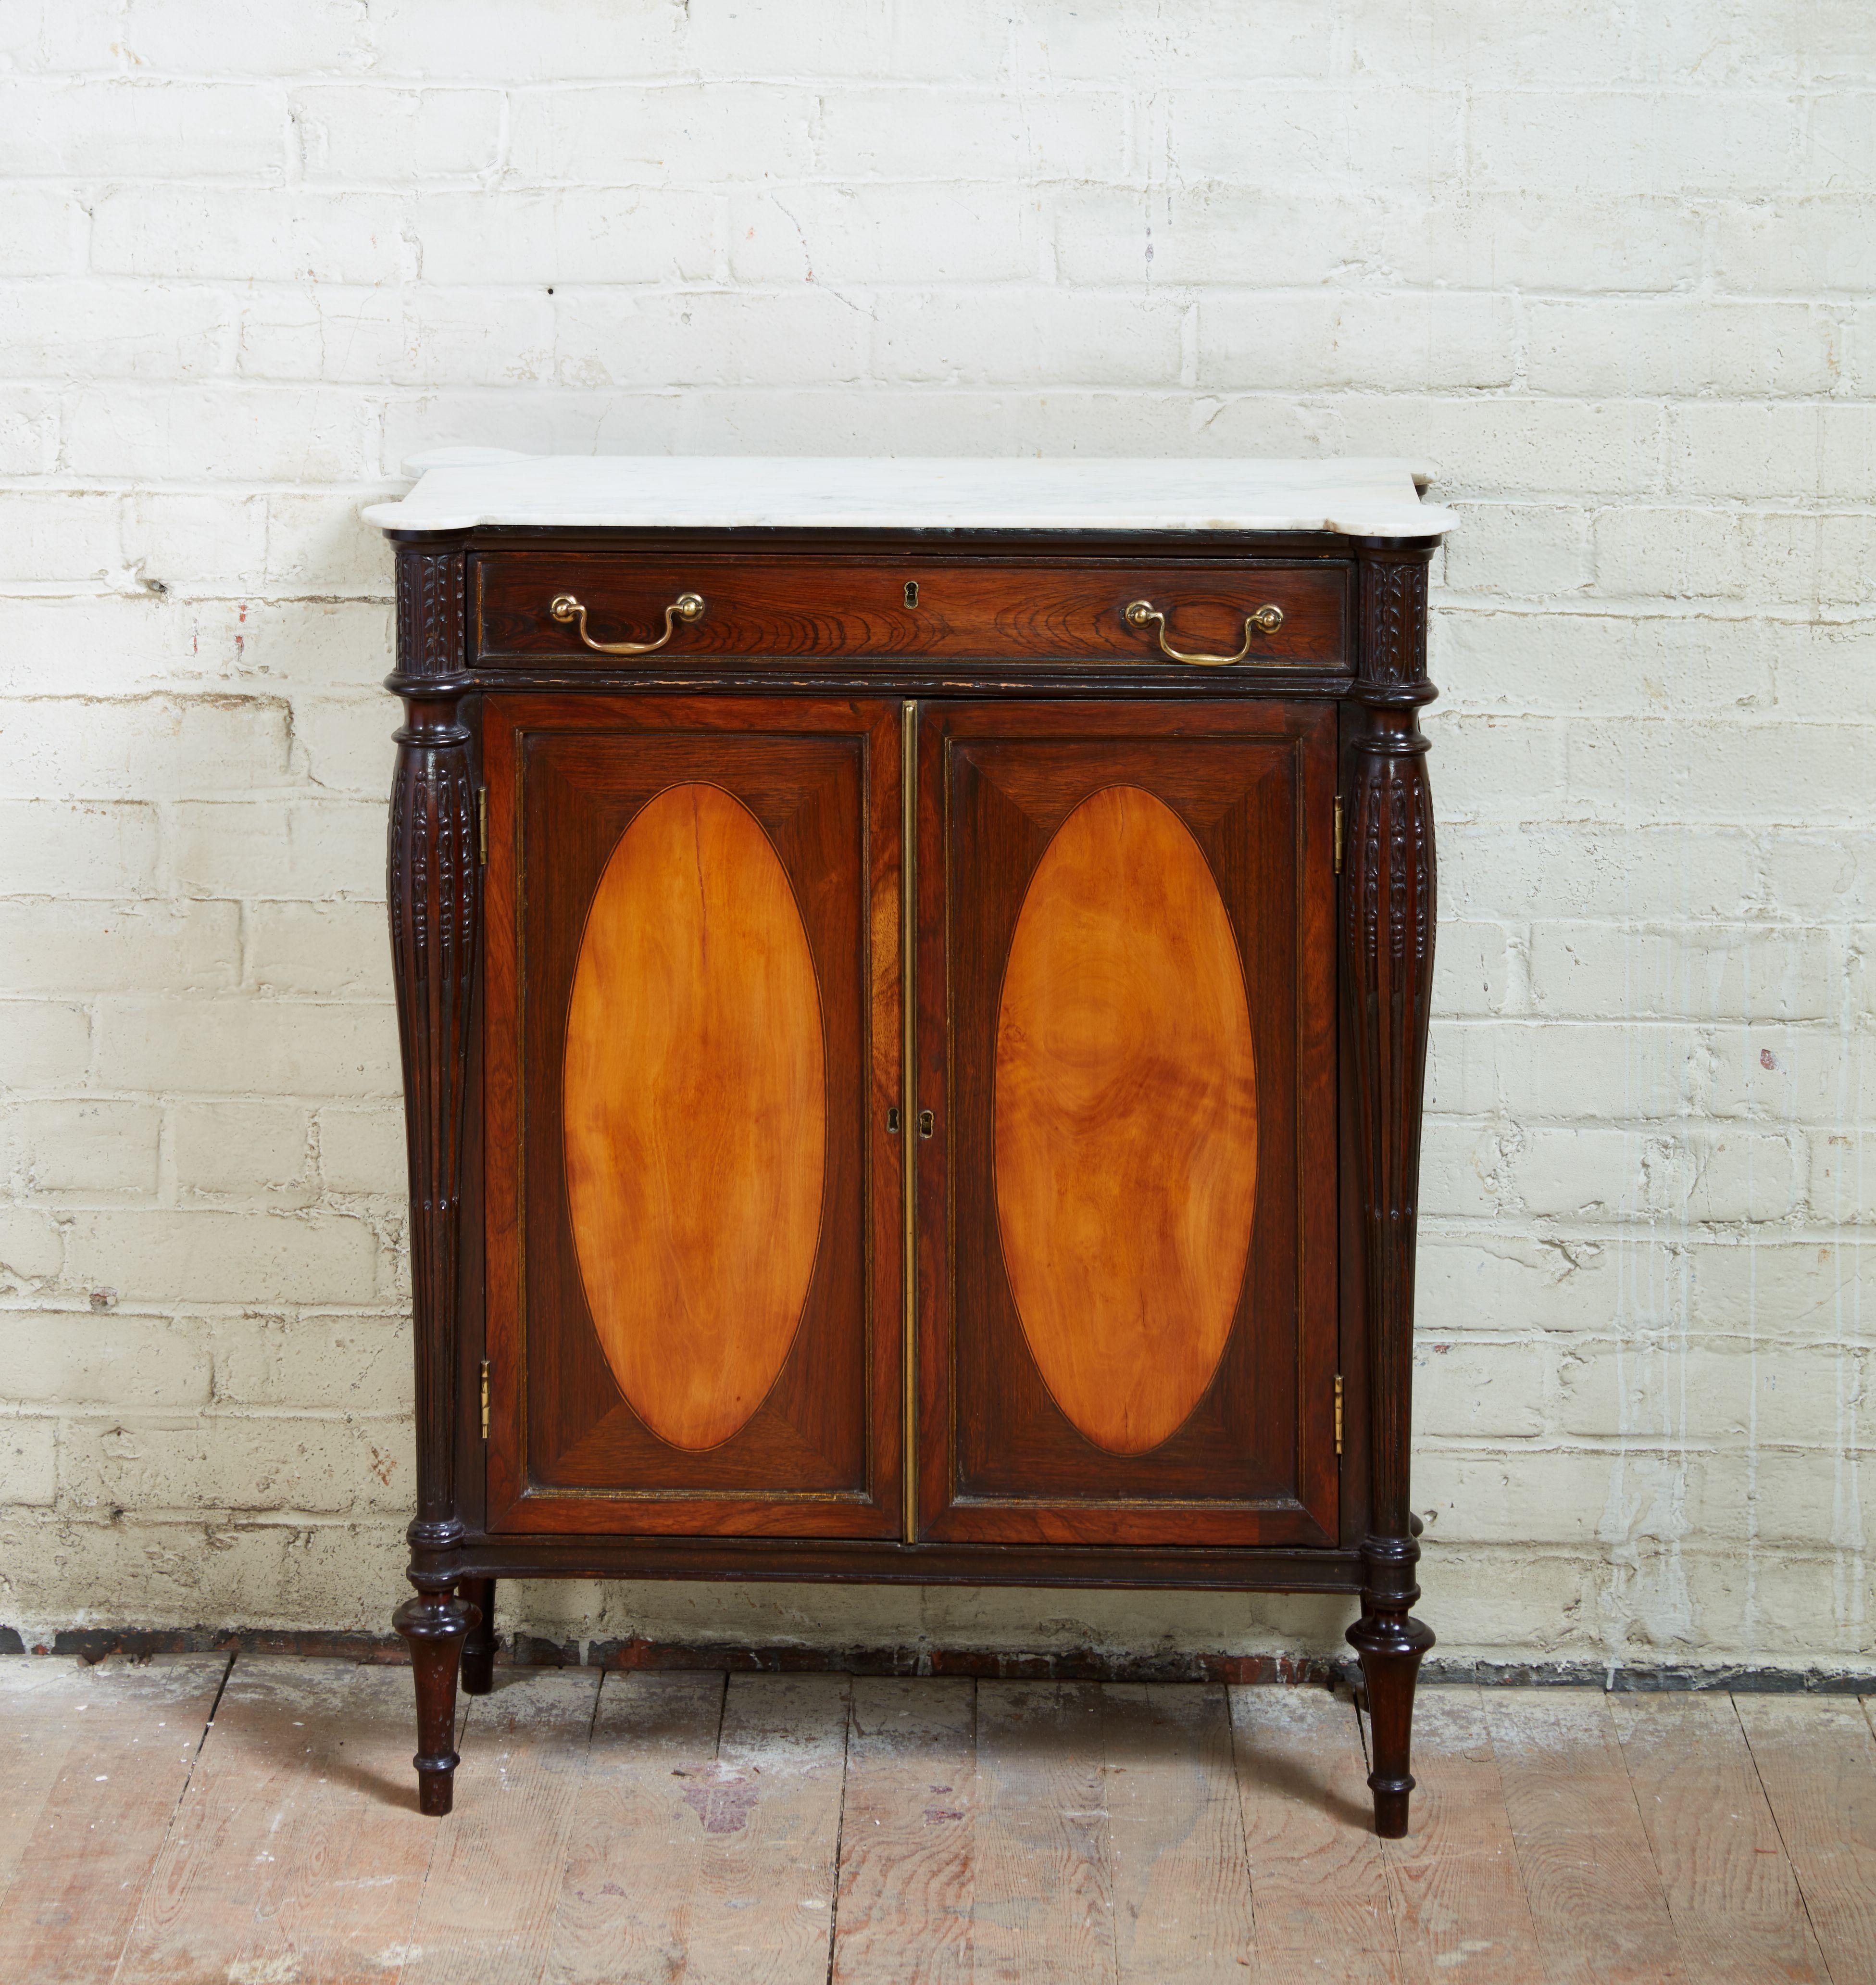 Rare George III period rosewood and satinwood cabinet of unusually shallow proportions, the white marble top with 